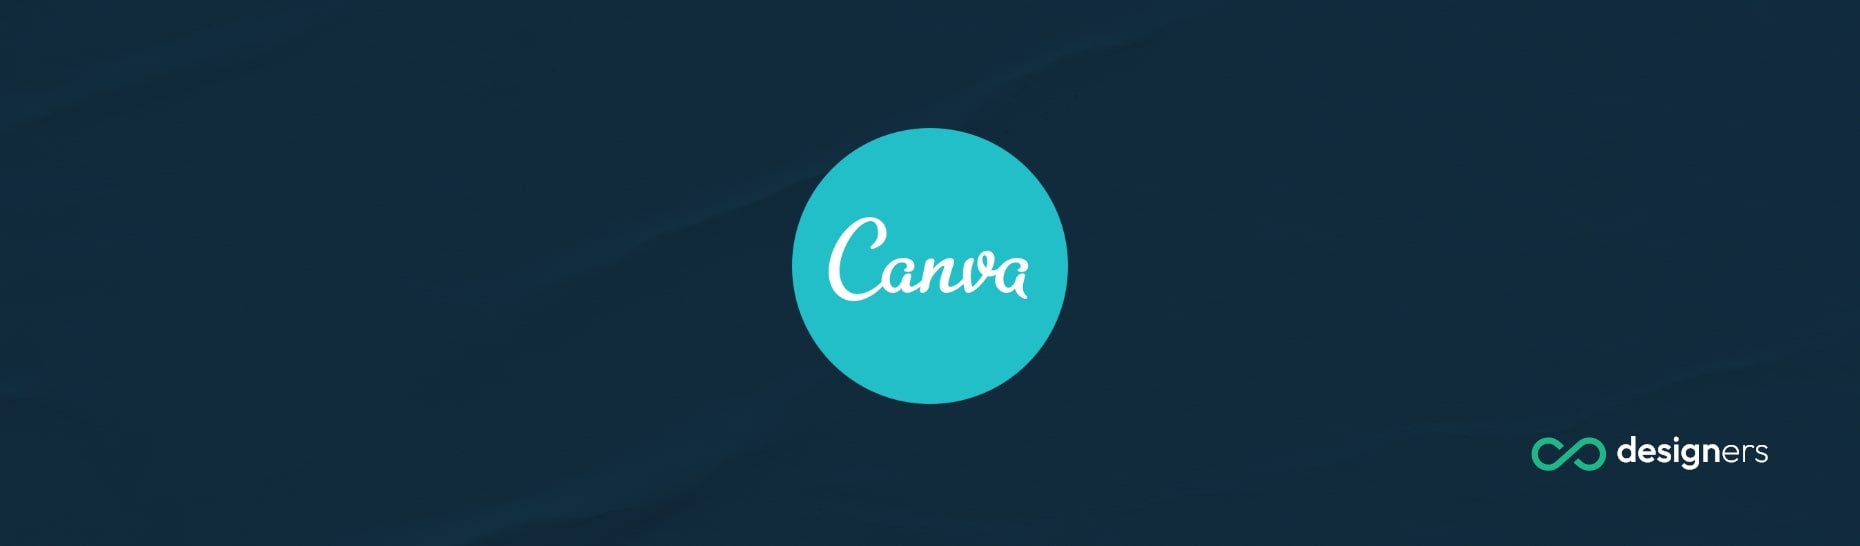 What Is Canva Data Breach?